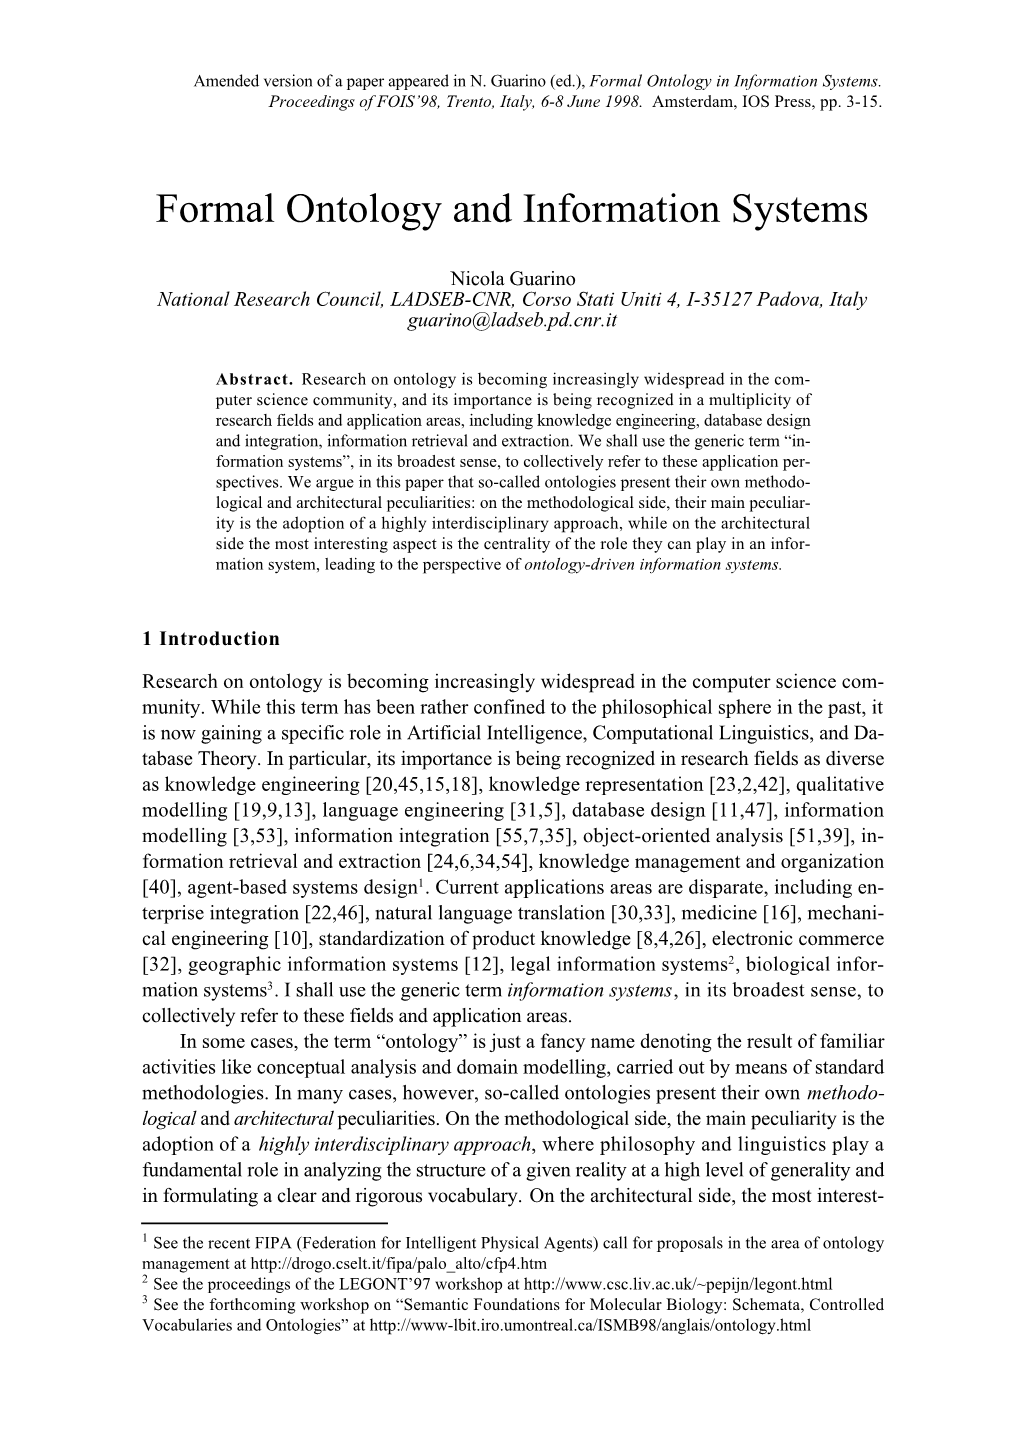 Formal Ontology and Information Systems